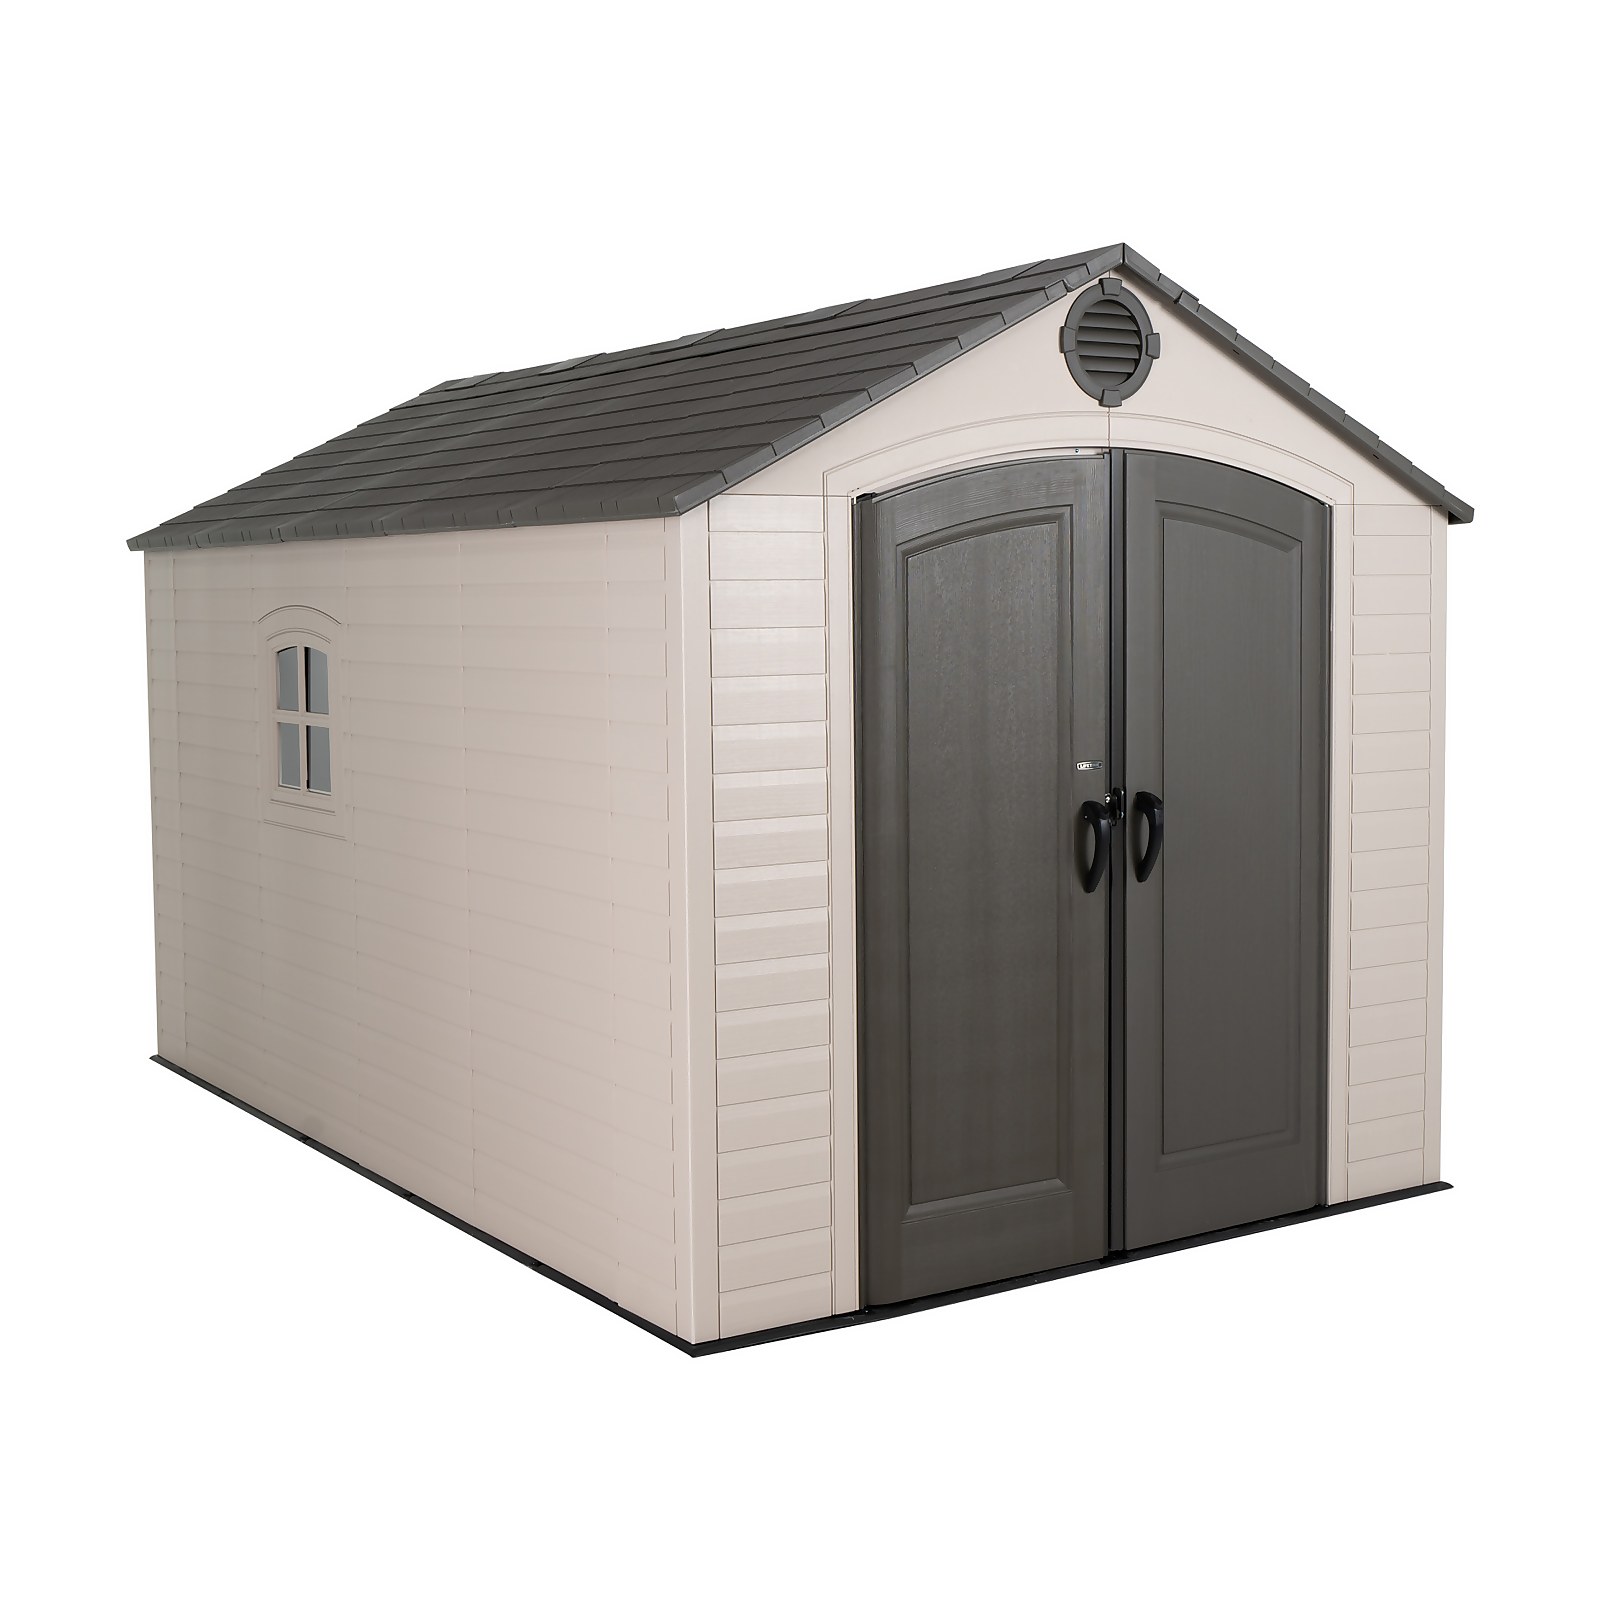 Lifetime Plastic Outdoor Storage Shed - 8x12.5ft